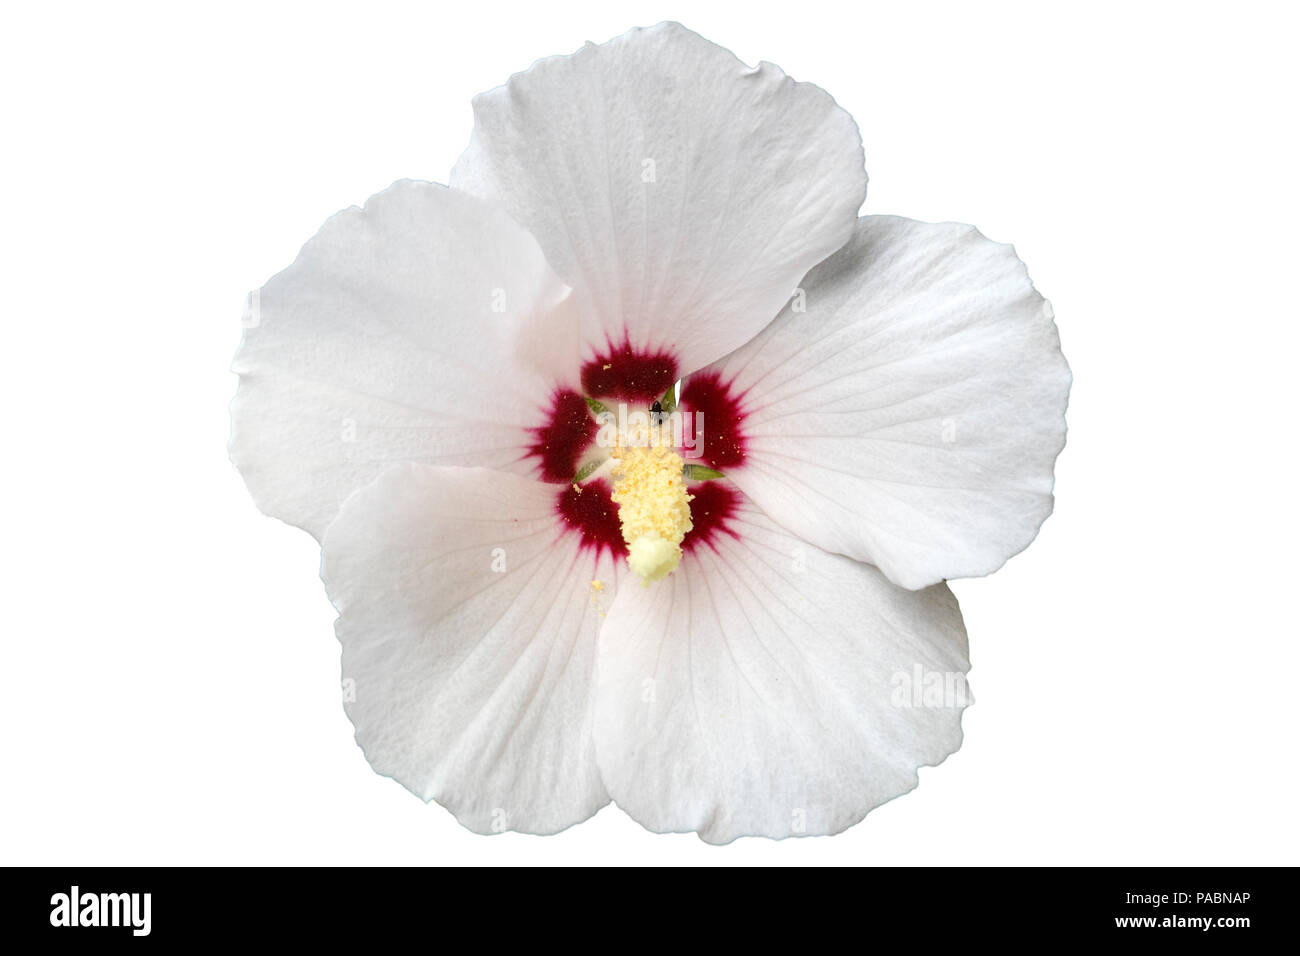 Hibiscus syriacus white with deep red center rose of Sharon 'Red Heart' flower isolated on white. Stock Photo